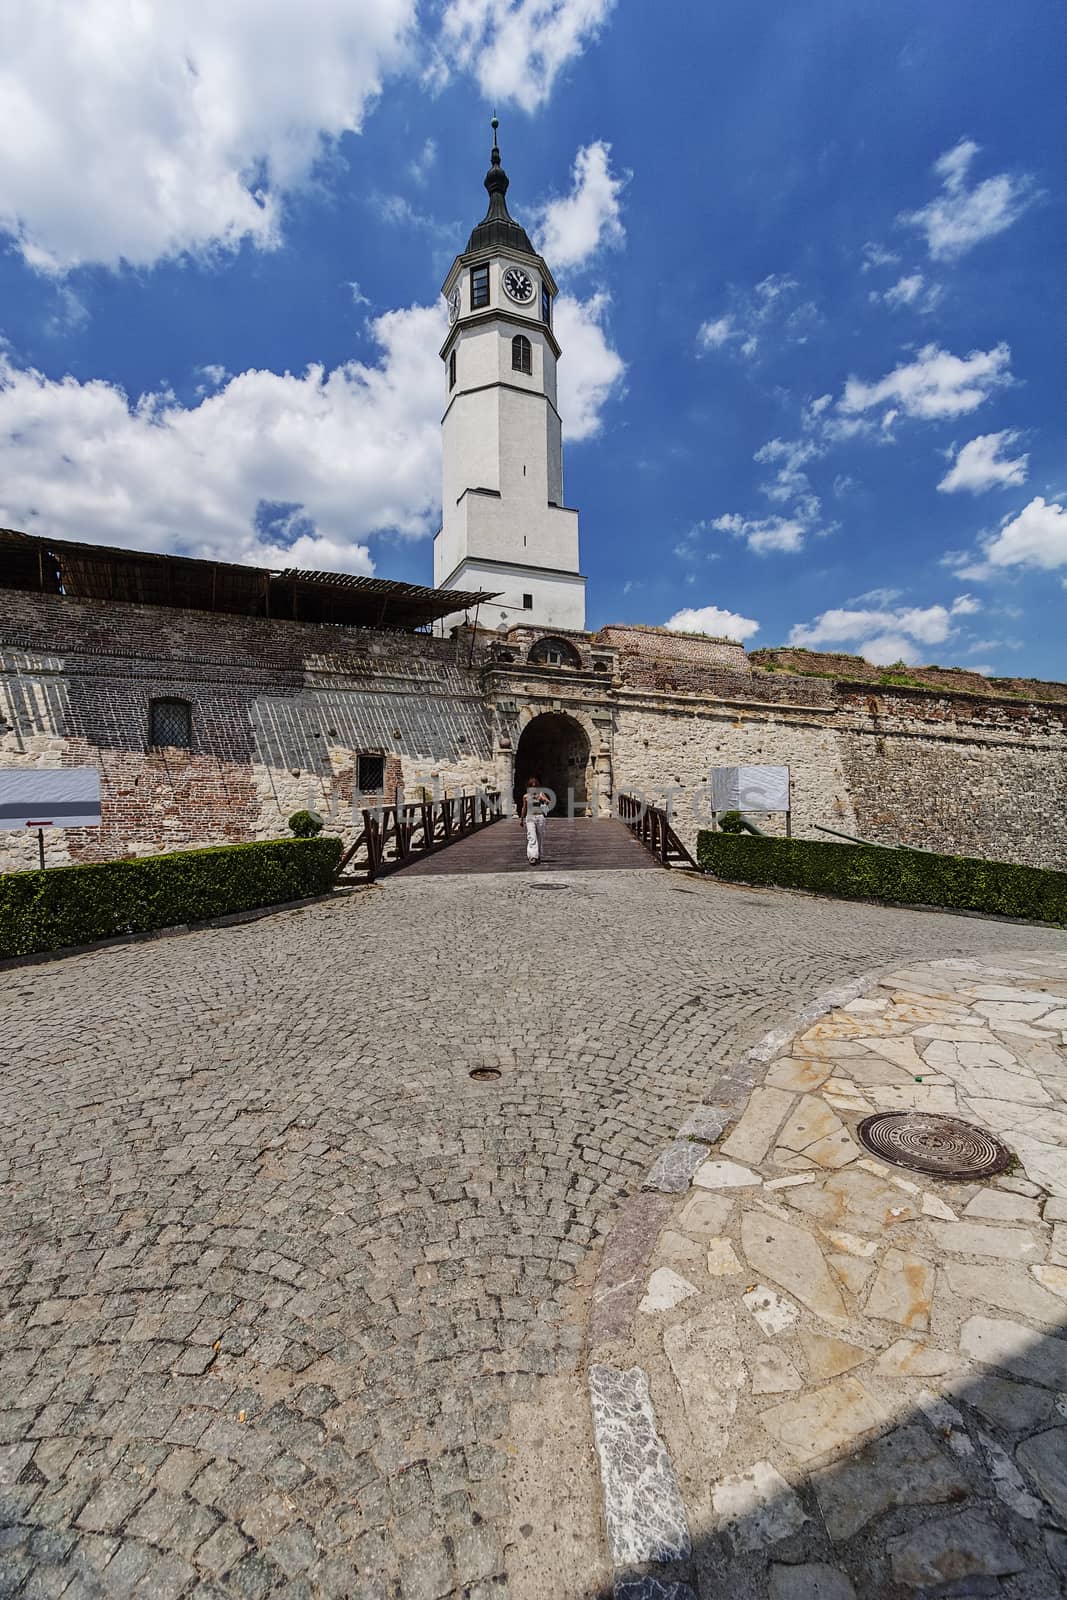 Belgrade medieval walls of fortress and old clock tower in day time, Serbia